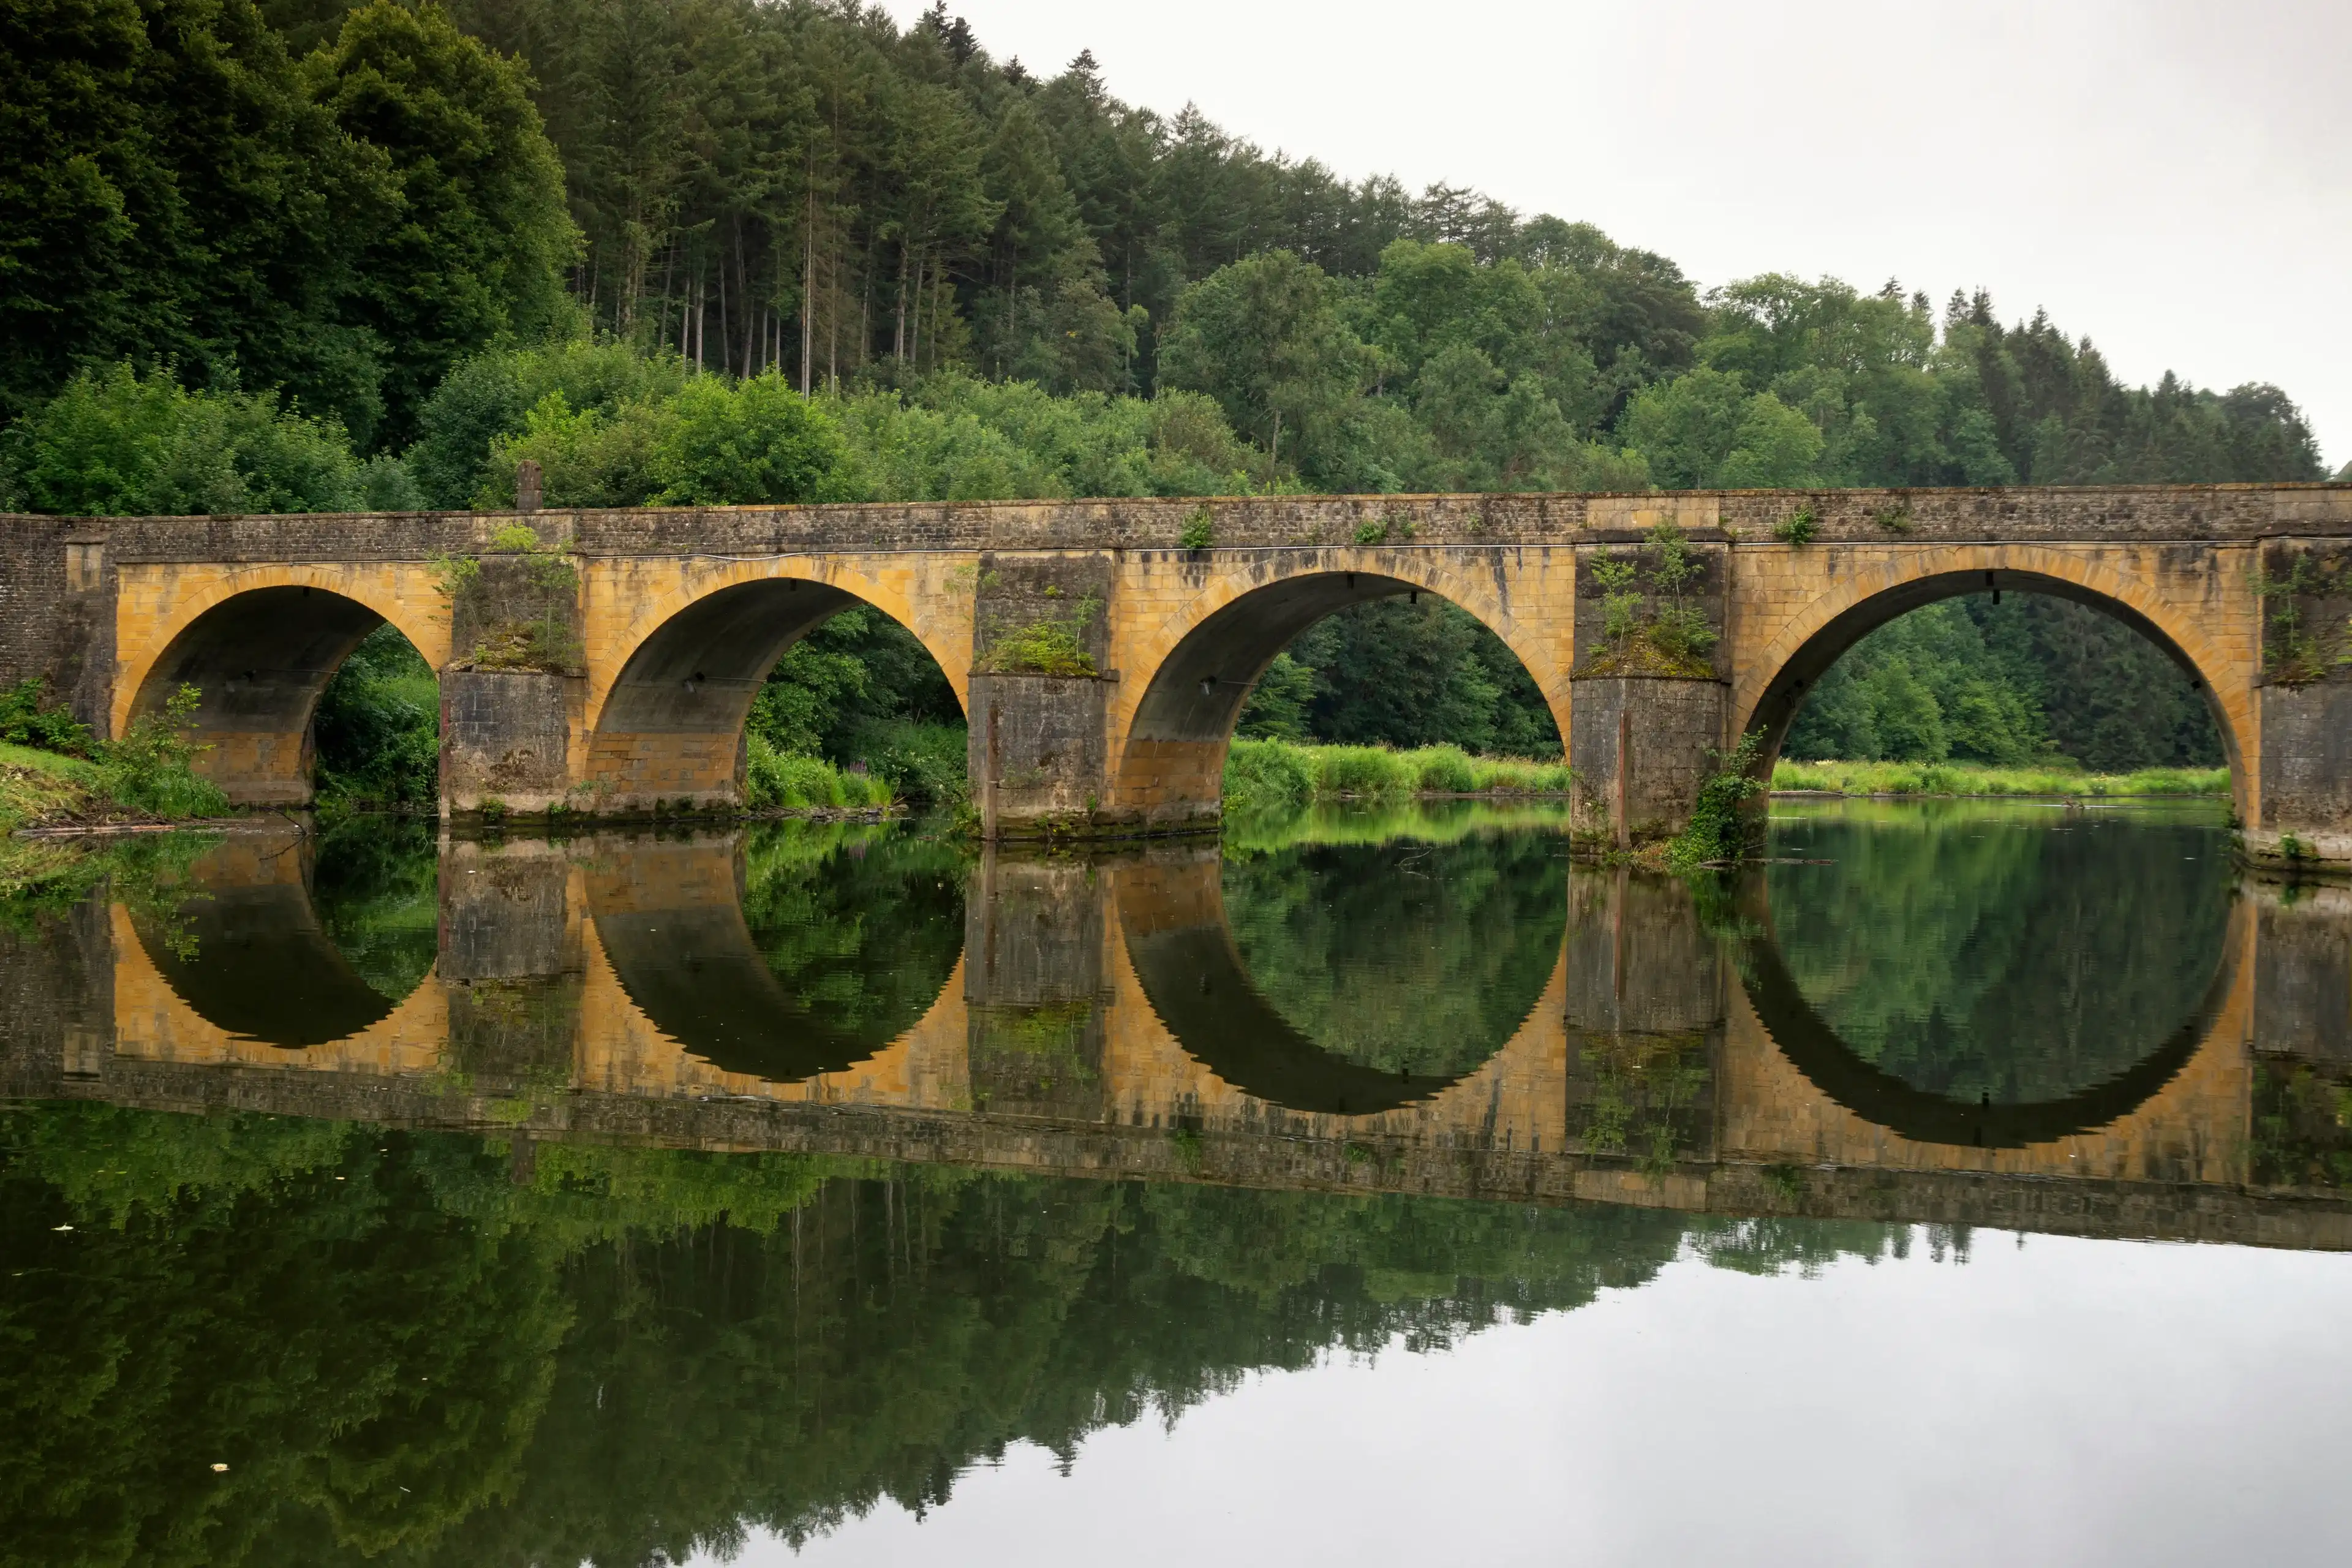 The famous Nicholas bridge over the Semois river near Chiny in the Belgian Ardennes